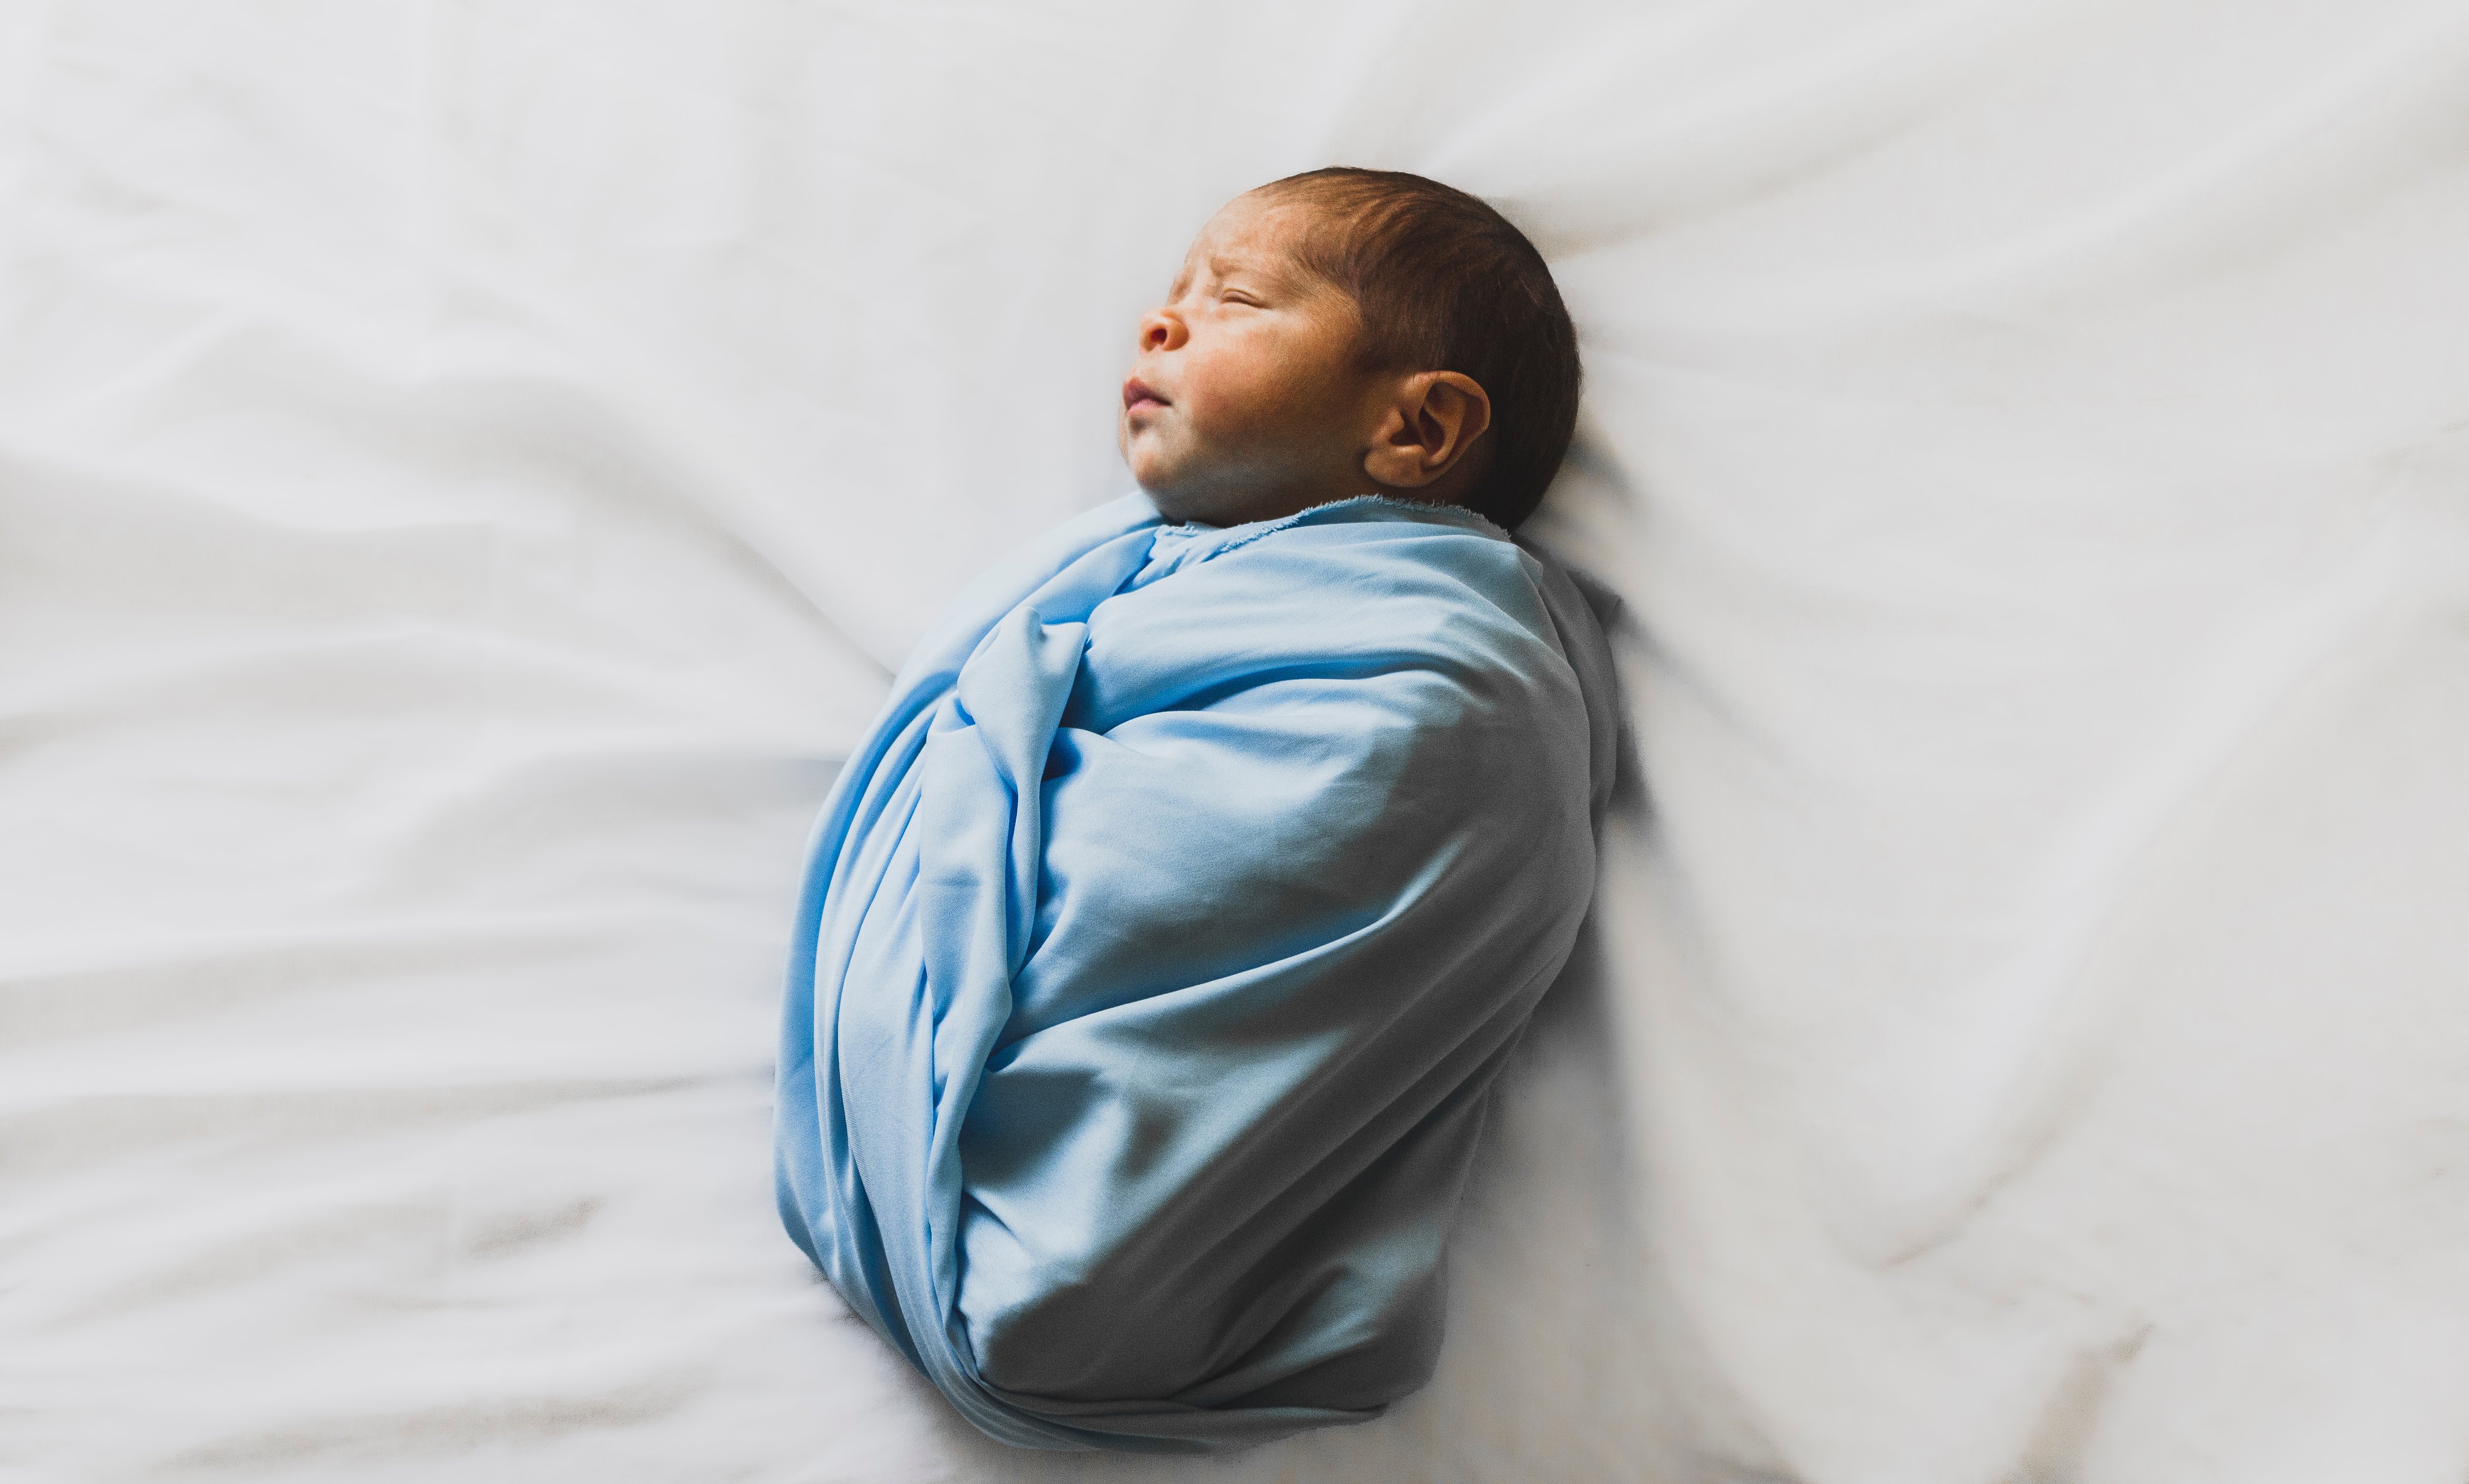 Get The Most Photogenic Gender-Neutral Baby Swaddles For A Newborn’s First Shoot